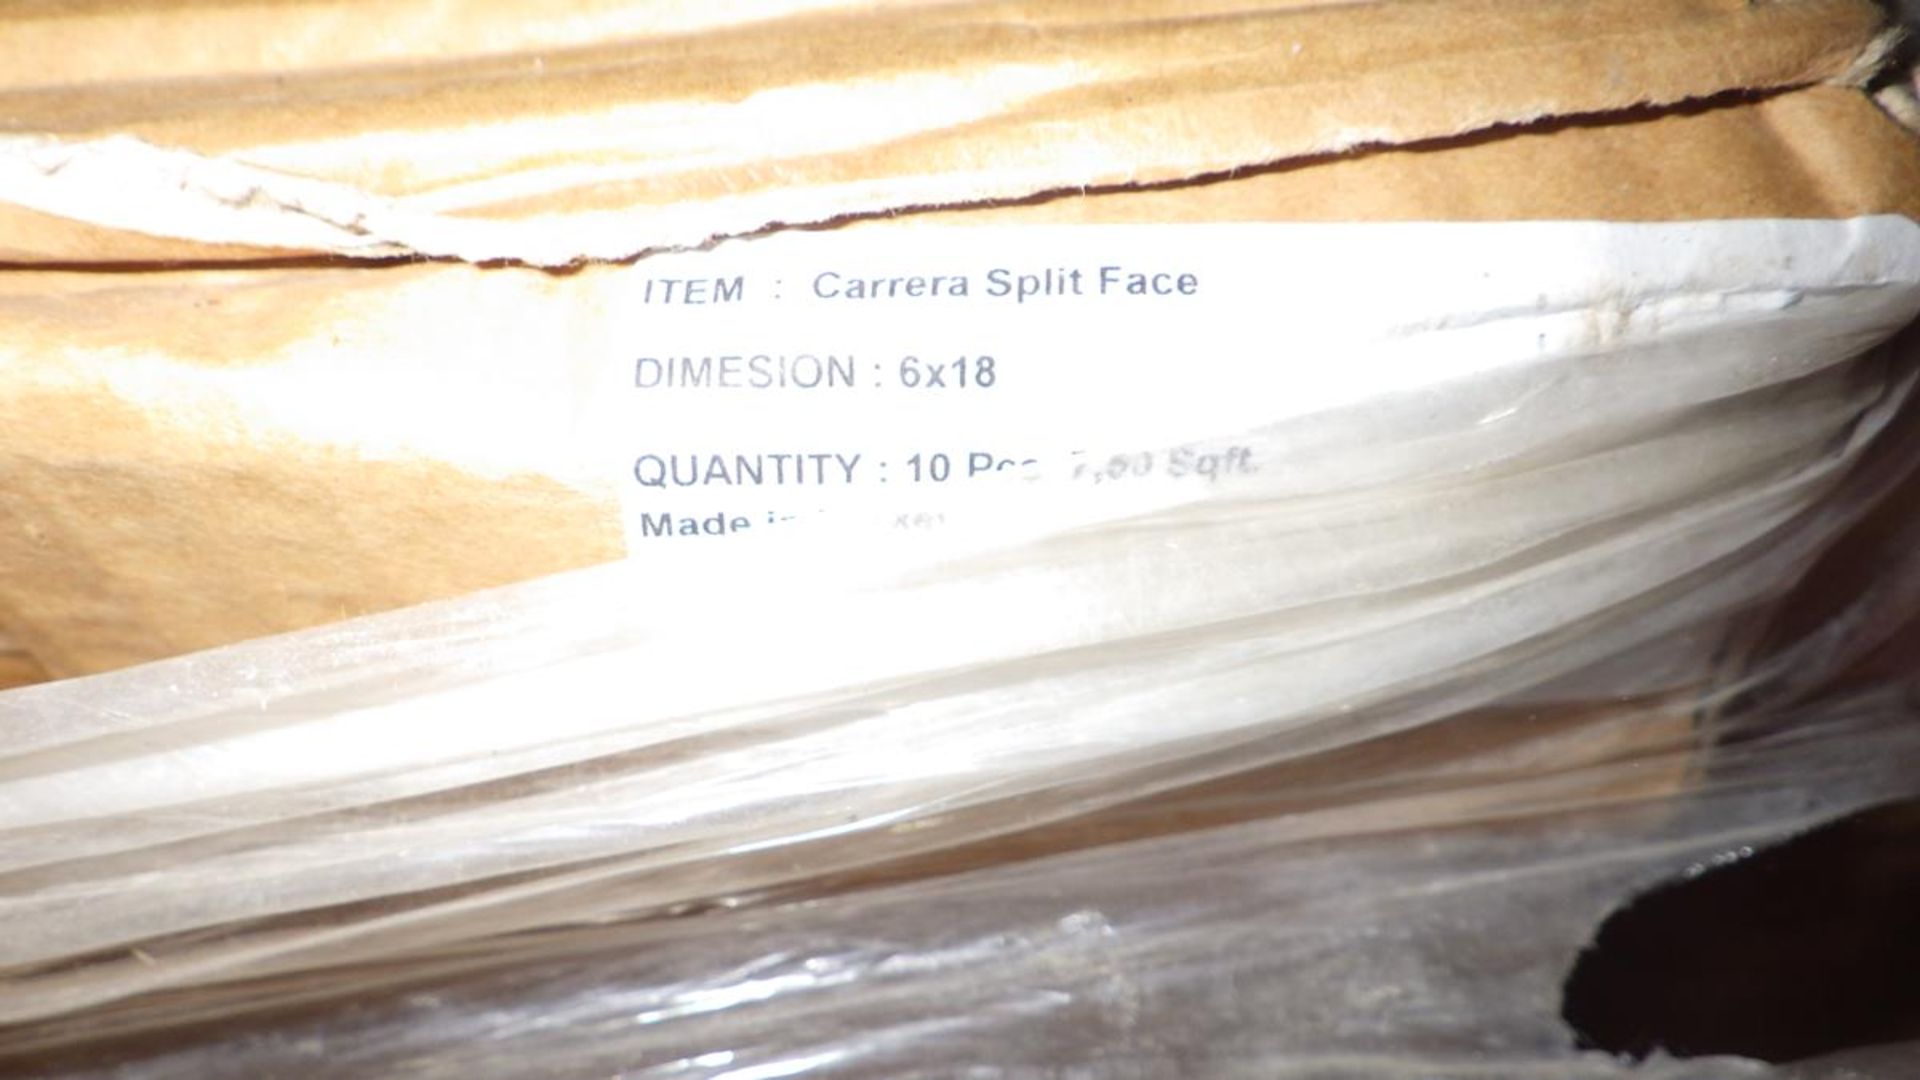 PALLET OF CARRERA SPLIT FACE CULTURE STONE 7 SQ FT PER BOX PRODUCT OF TURKEY - Image 4 of 4